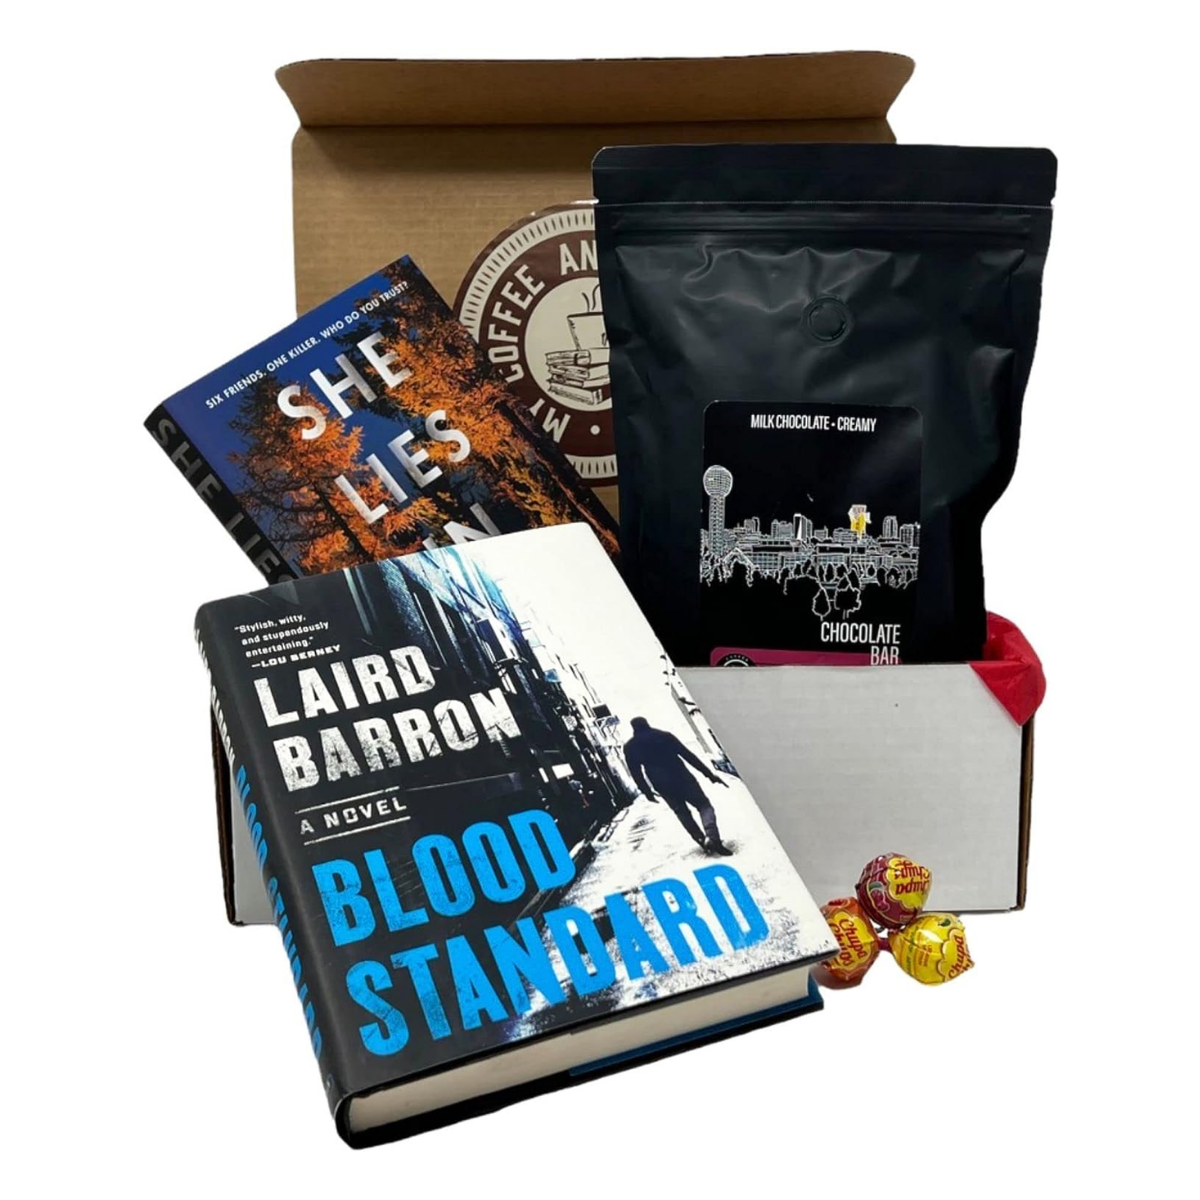 31. Surprise Him Every Month with a Book Subscription Box: The Perfect Anniversary Gift Idea